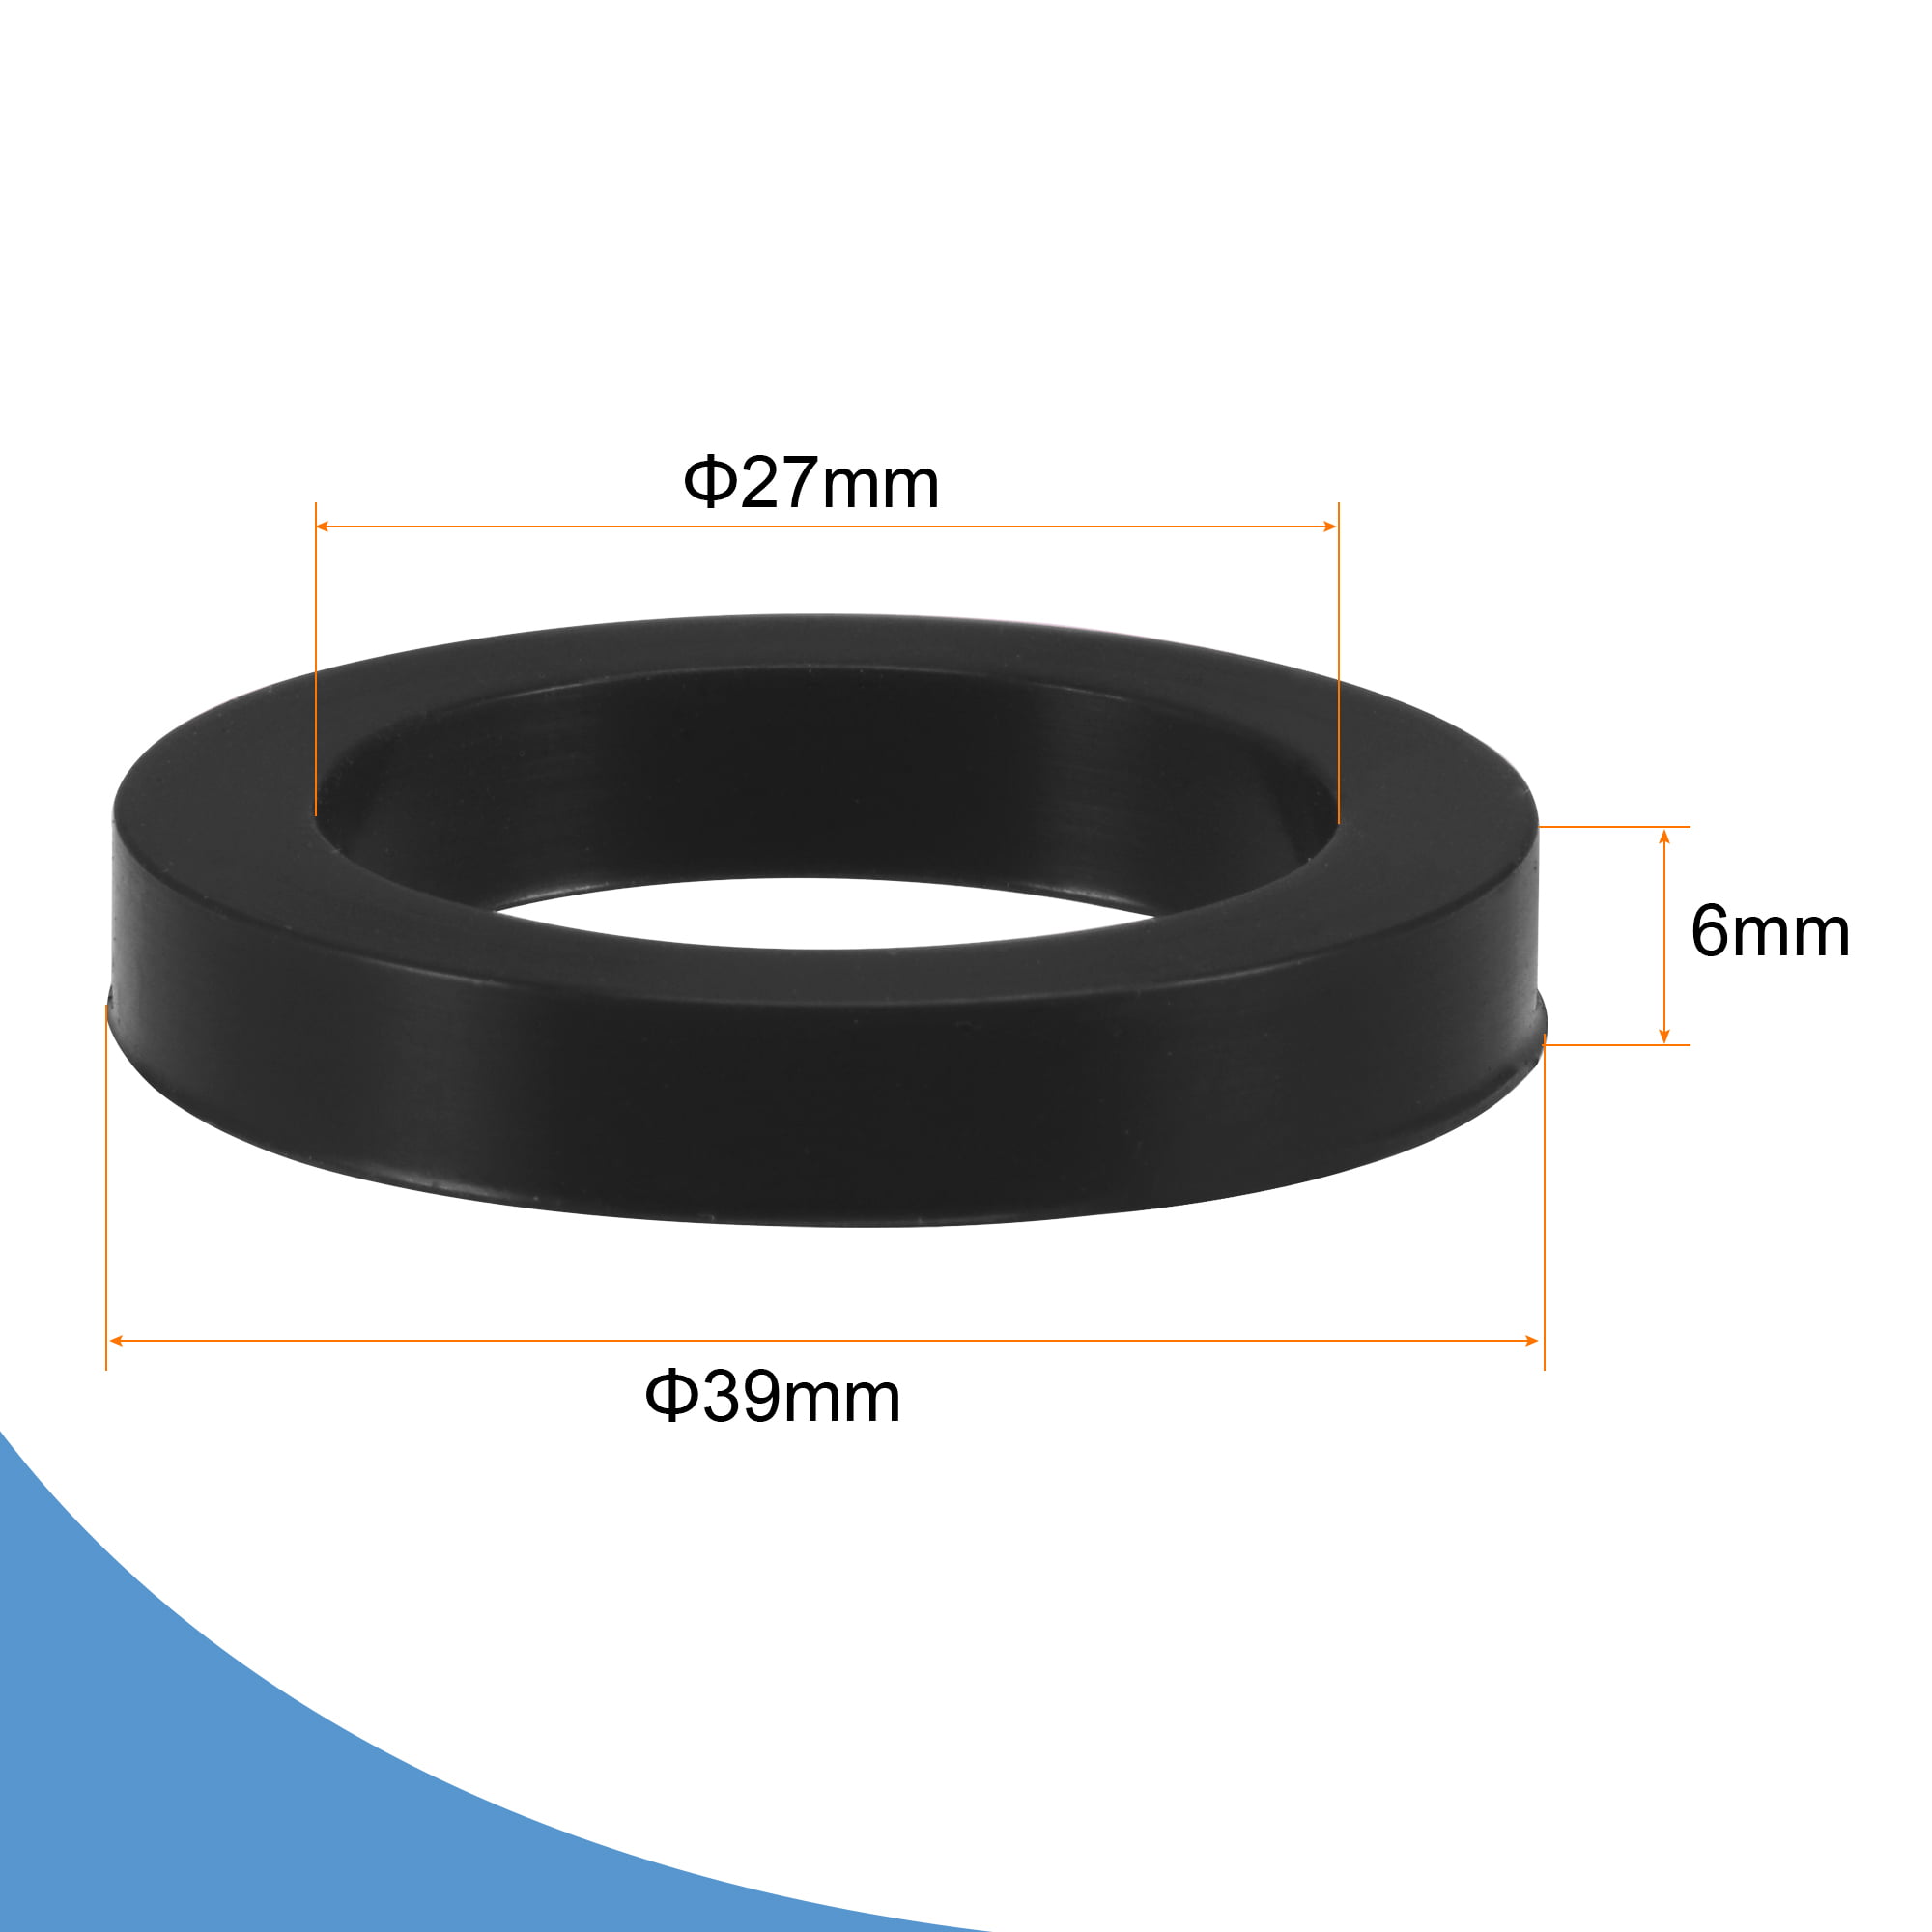 sourcing map Nitrile Rubber Flat Washer 1 Inch DN25 Gasket for Wrench Type Quick Connector Black